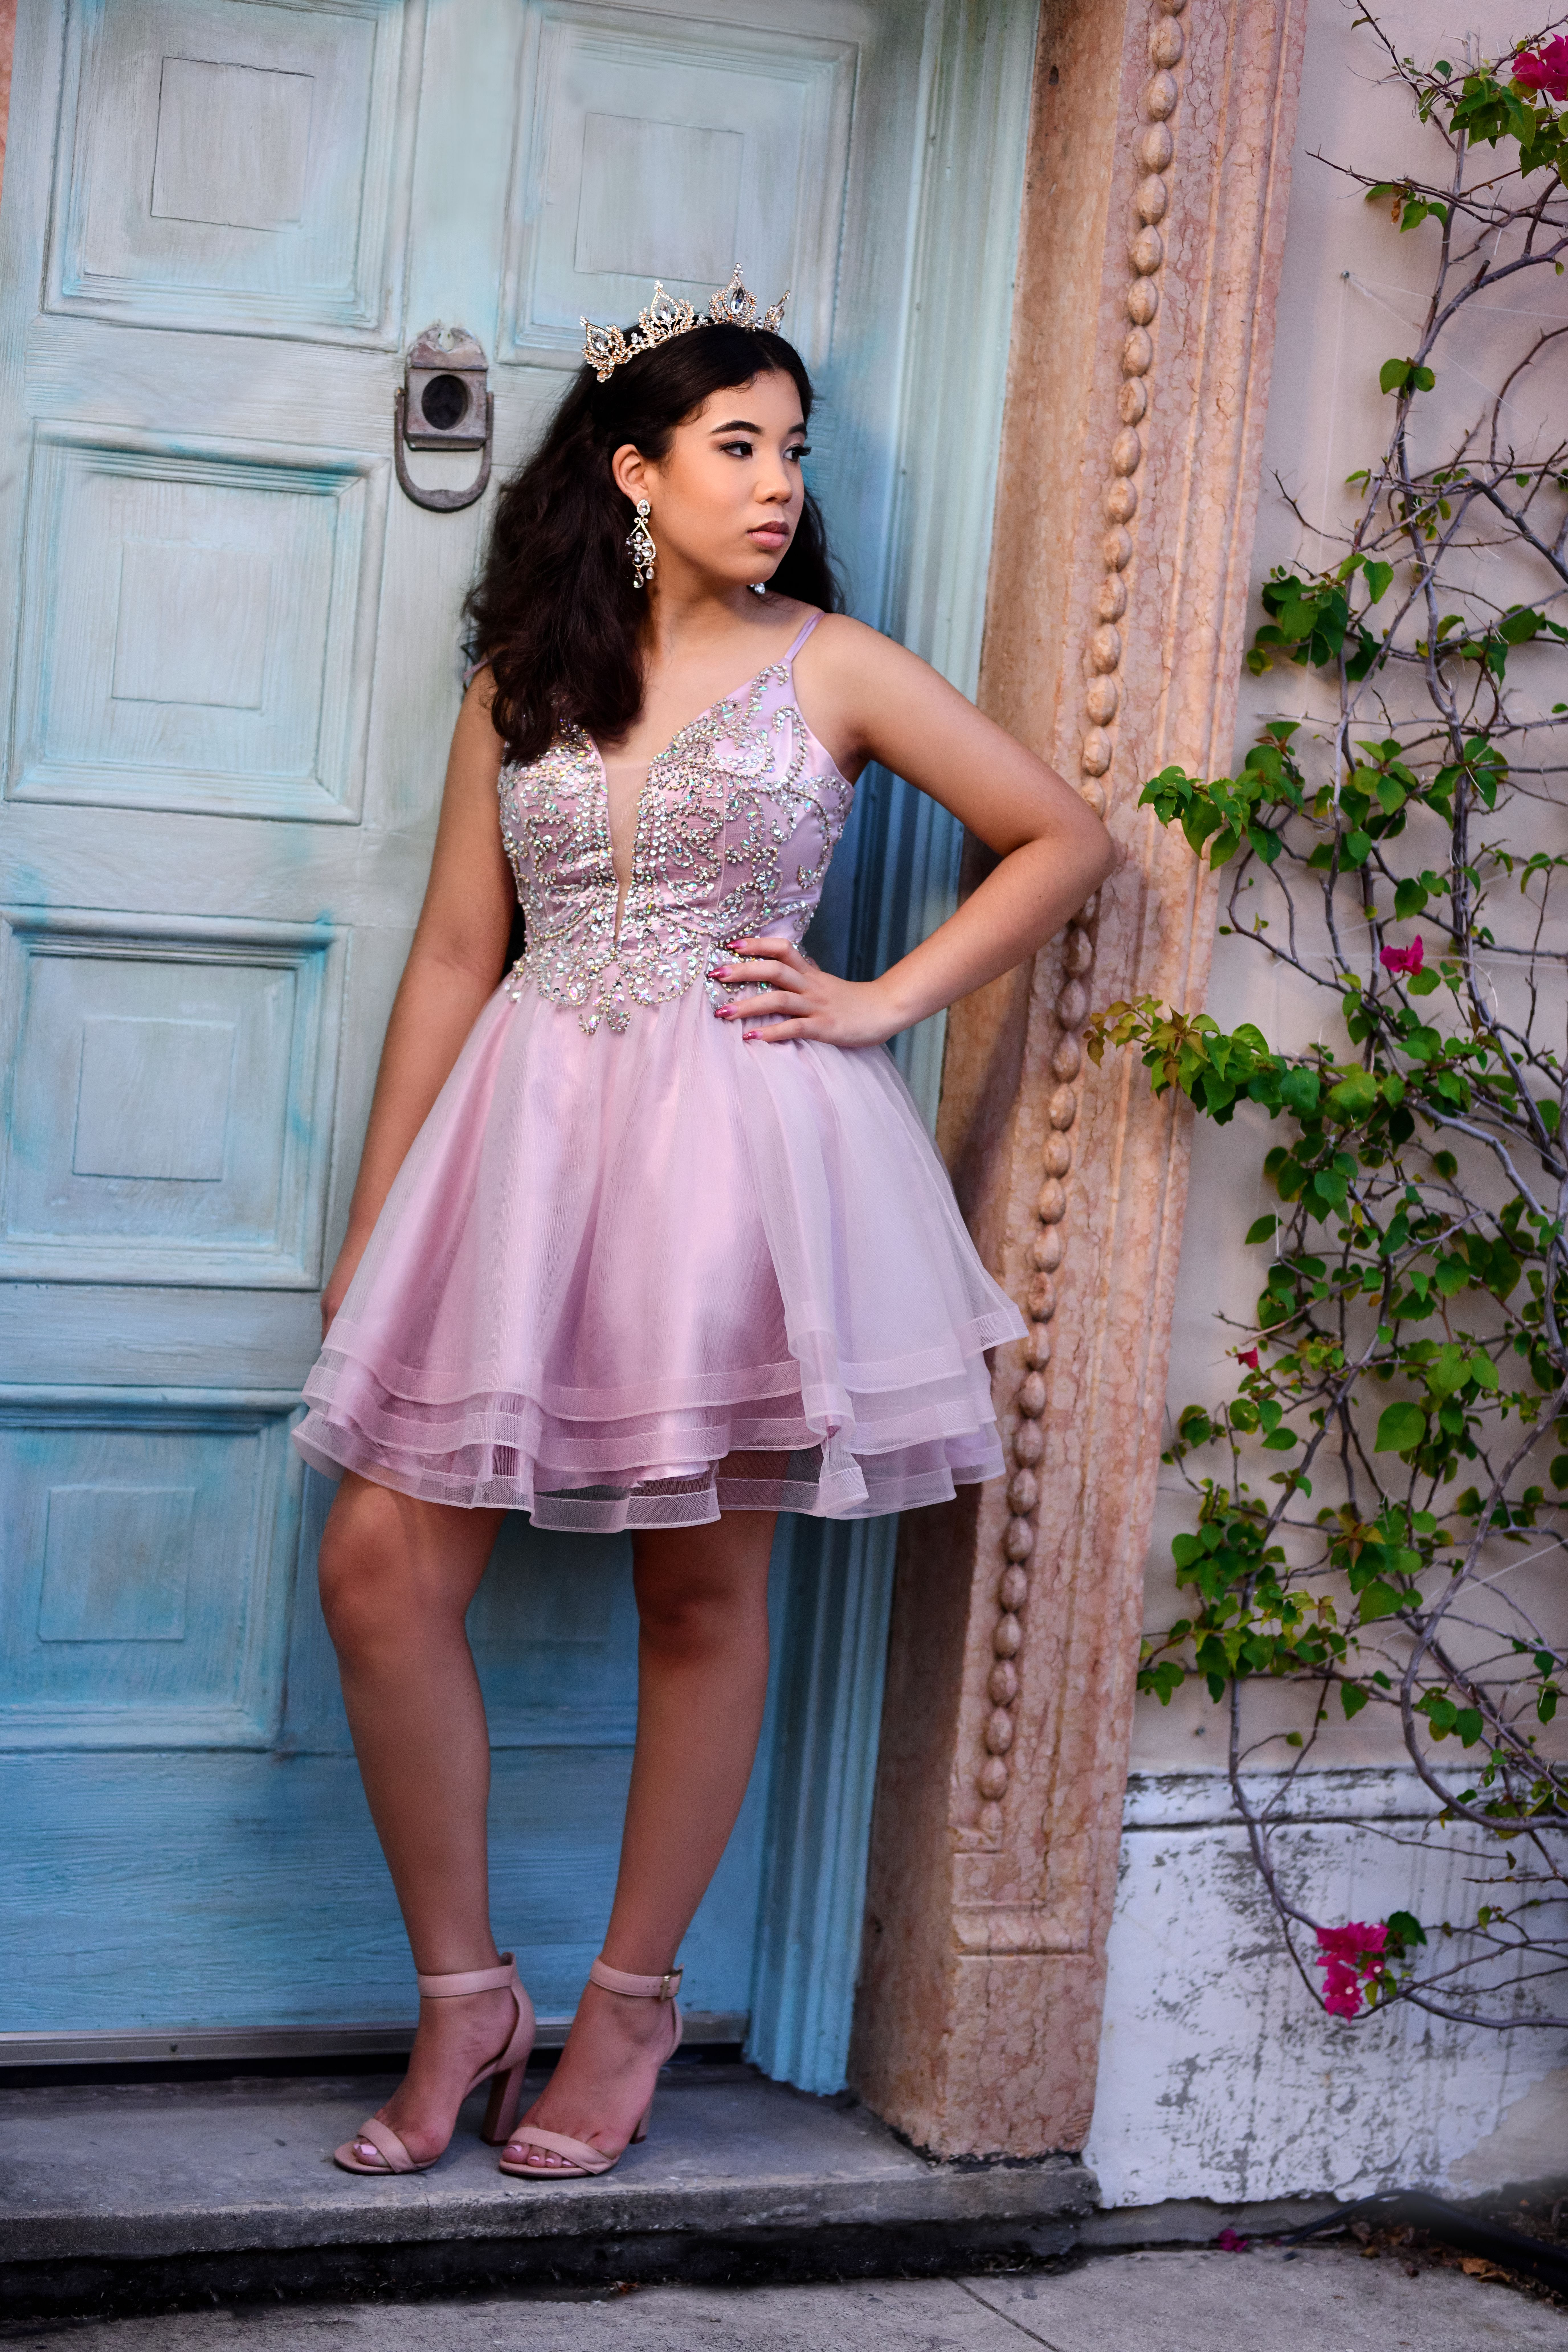 A Quinceanera in a cocktail dress standing in front of a blue door